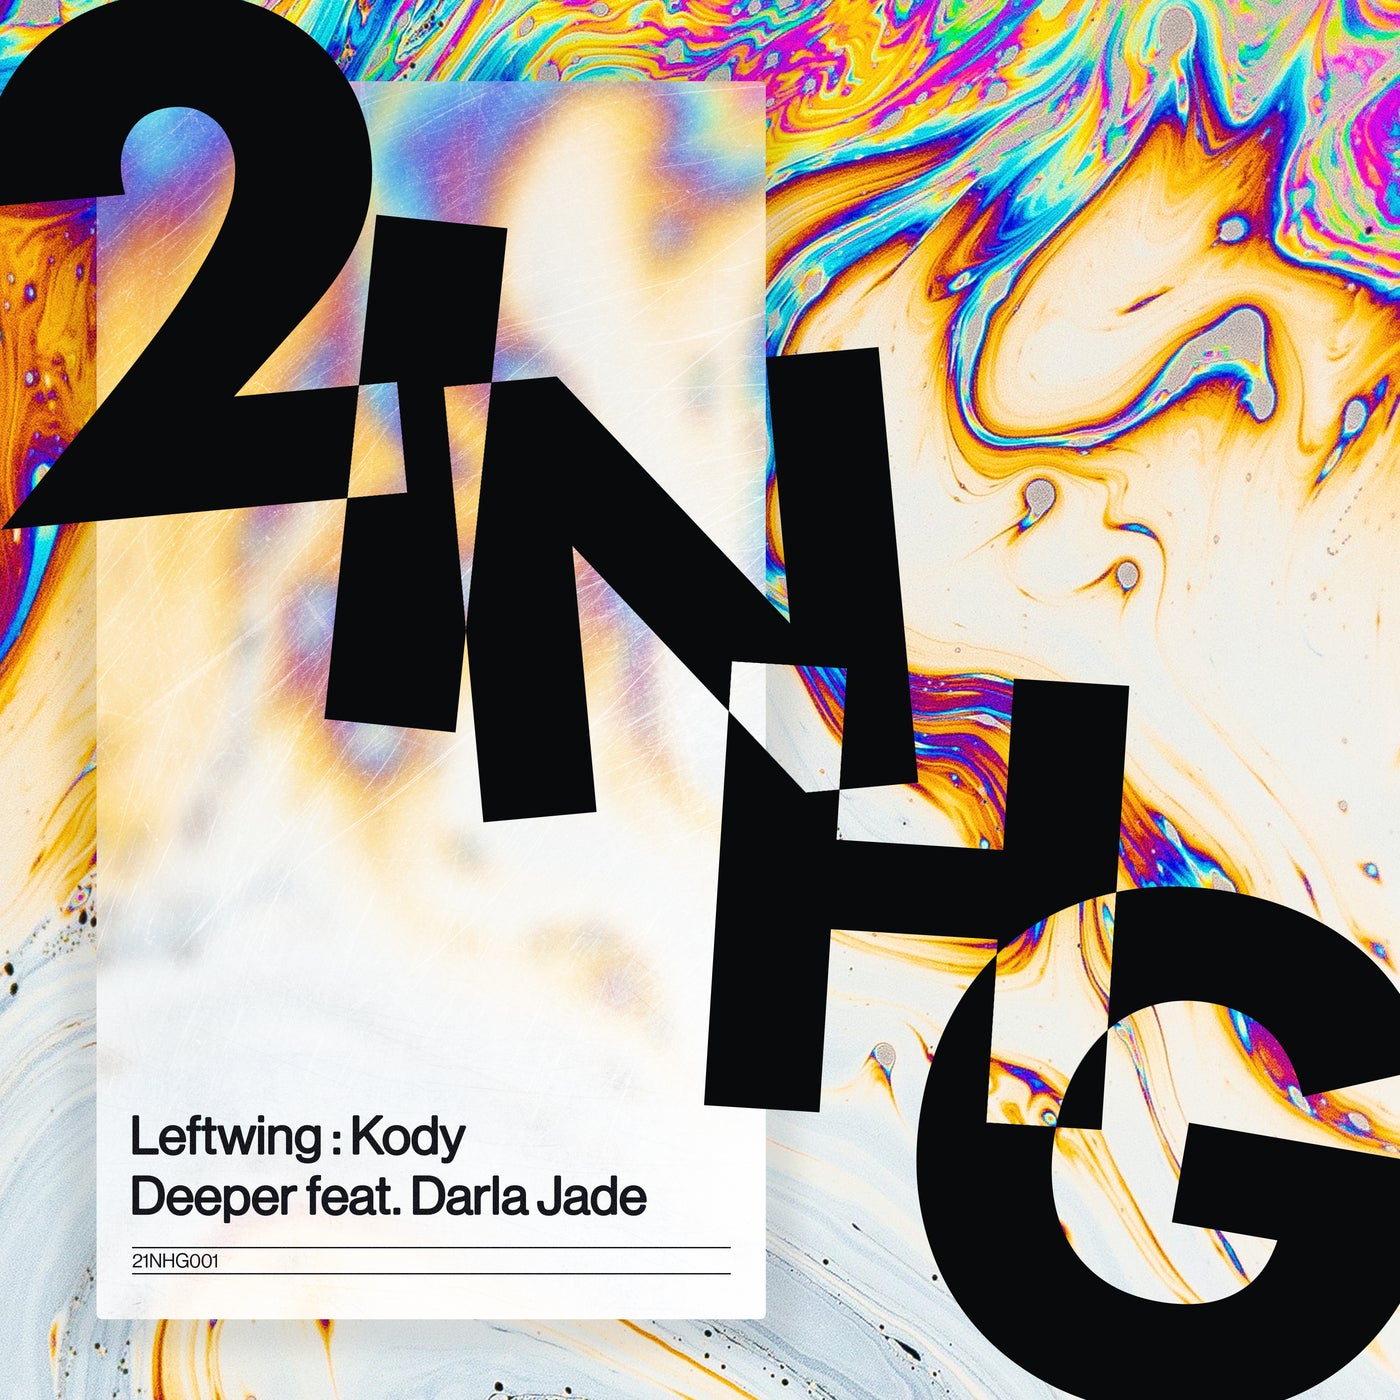 image cover: Leftwing : Kody, Darla Jade - Deeper (Extended Mix) / 21NHG001S2